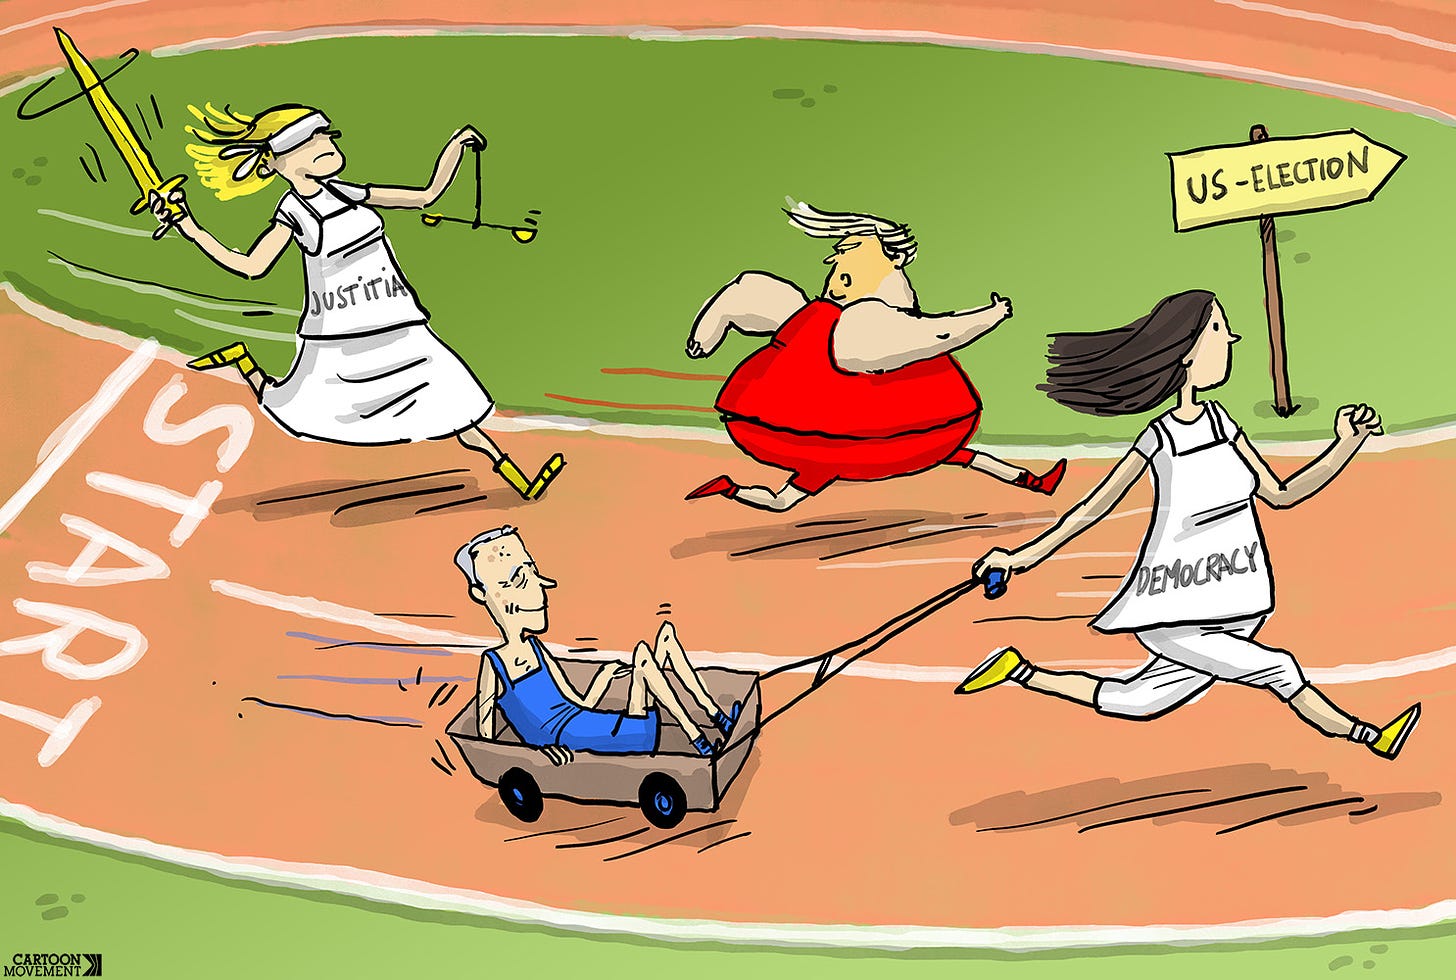 Cartoon showing a race track with Biden and Trump racing. Biden is in a cart pulled by a woman with a stash that says ‘Democracy’. Trump is chased down the track by Lady Justice.